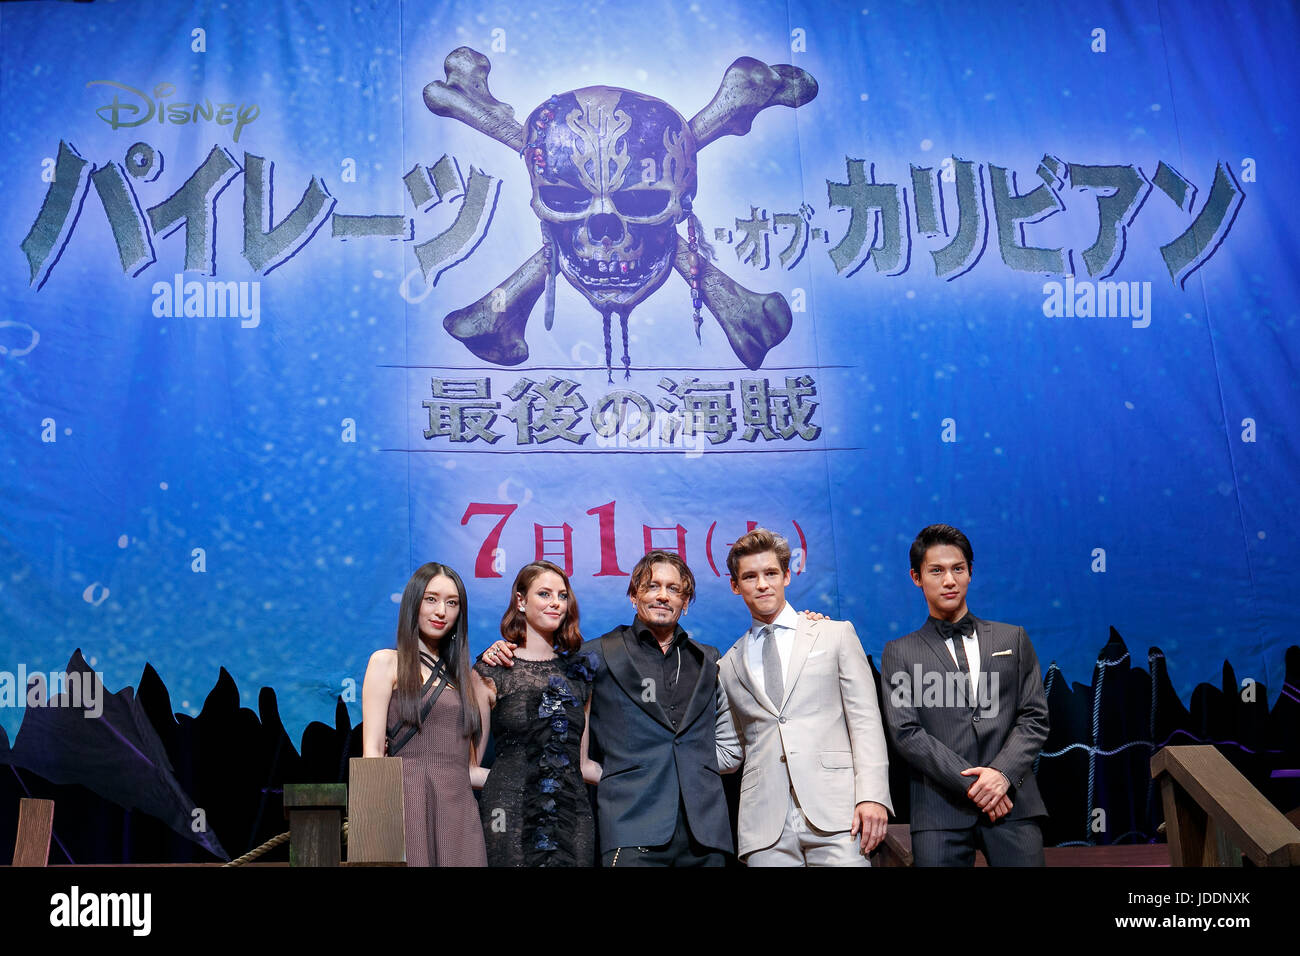 Tokyo, Japan. 20th June, 2017. (L to R) Japanese actress Chiaki Kuriyama, actress Kaya Scodelario, actor Johnny Depp, actor Brenton Thwaites and Japanese actor Taishi Nakagawa, pose for cameras during the premiere for the film Pirates of the Caribbean: Dead Men Tell No Tales on June 20, 2017, Tokyo, Japan. Depp appeared alongside actors Brenton Thwaites and Kaya Scodelario at the premiere for Pirates of the Caribbean: Dead Men Tell No Tales. The fifth installment to the hit series opens on July 1 in Japan. Credit: Aflo Co. Ltd./Alamy Live News Stock Photo